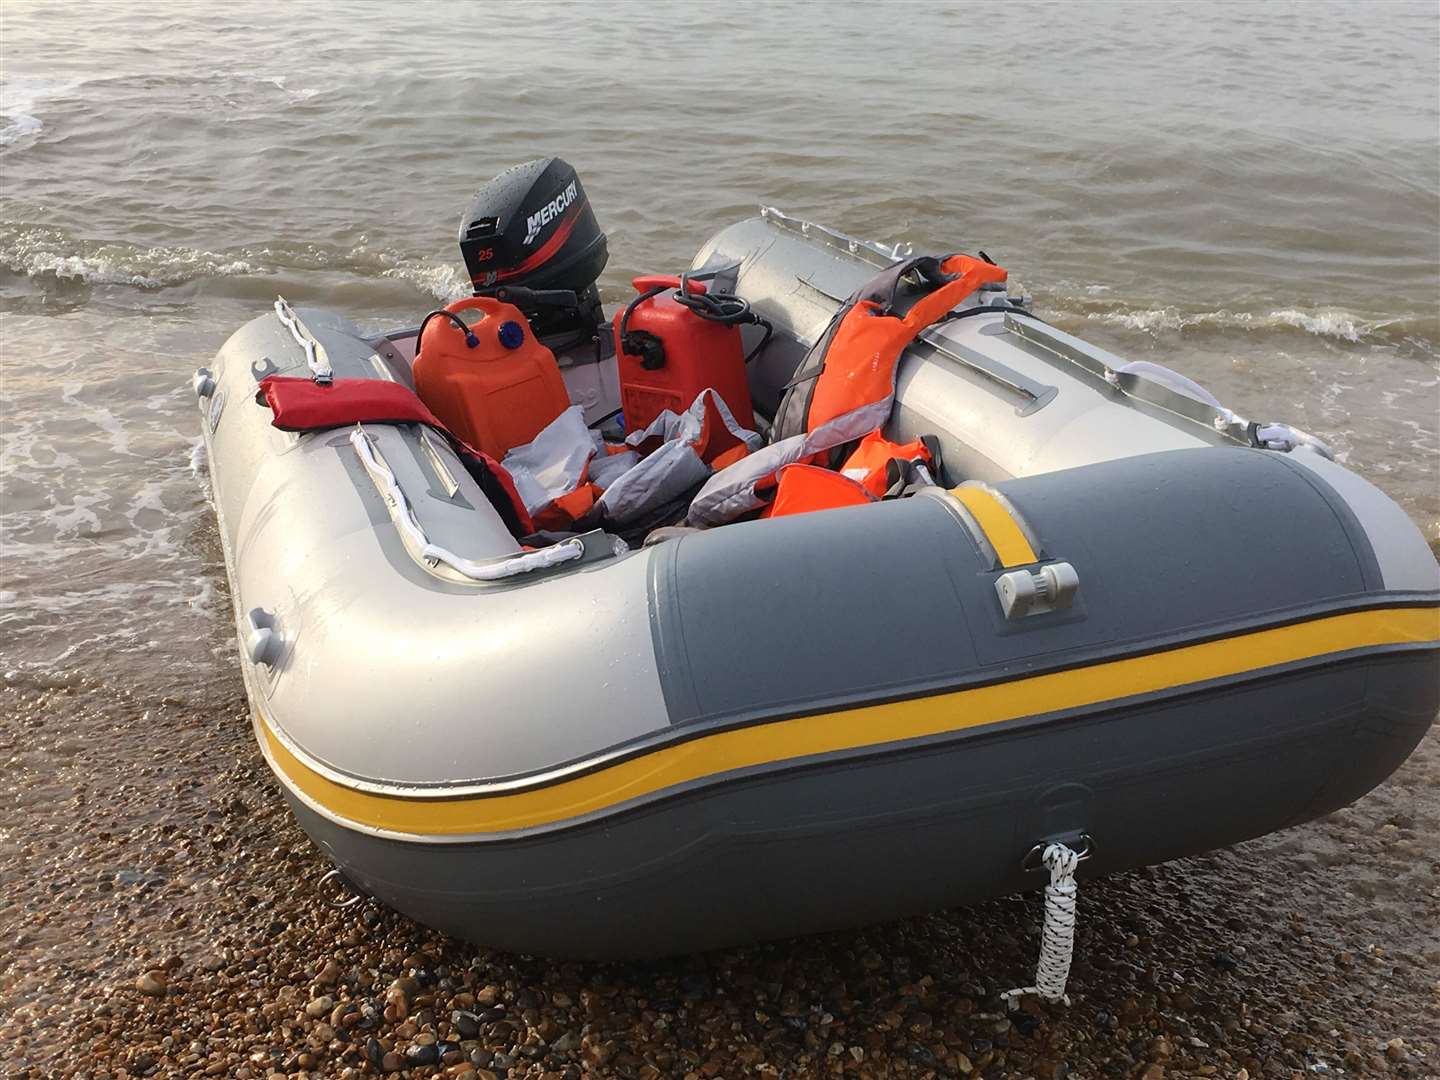 A RHIB boat similar to this one was used. Photo: Liliandra Von Kent